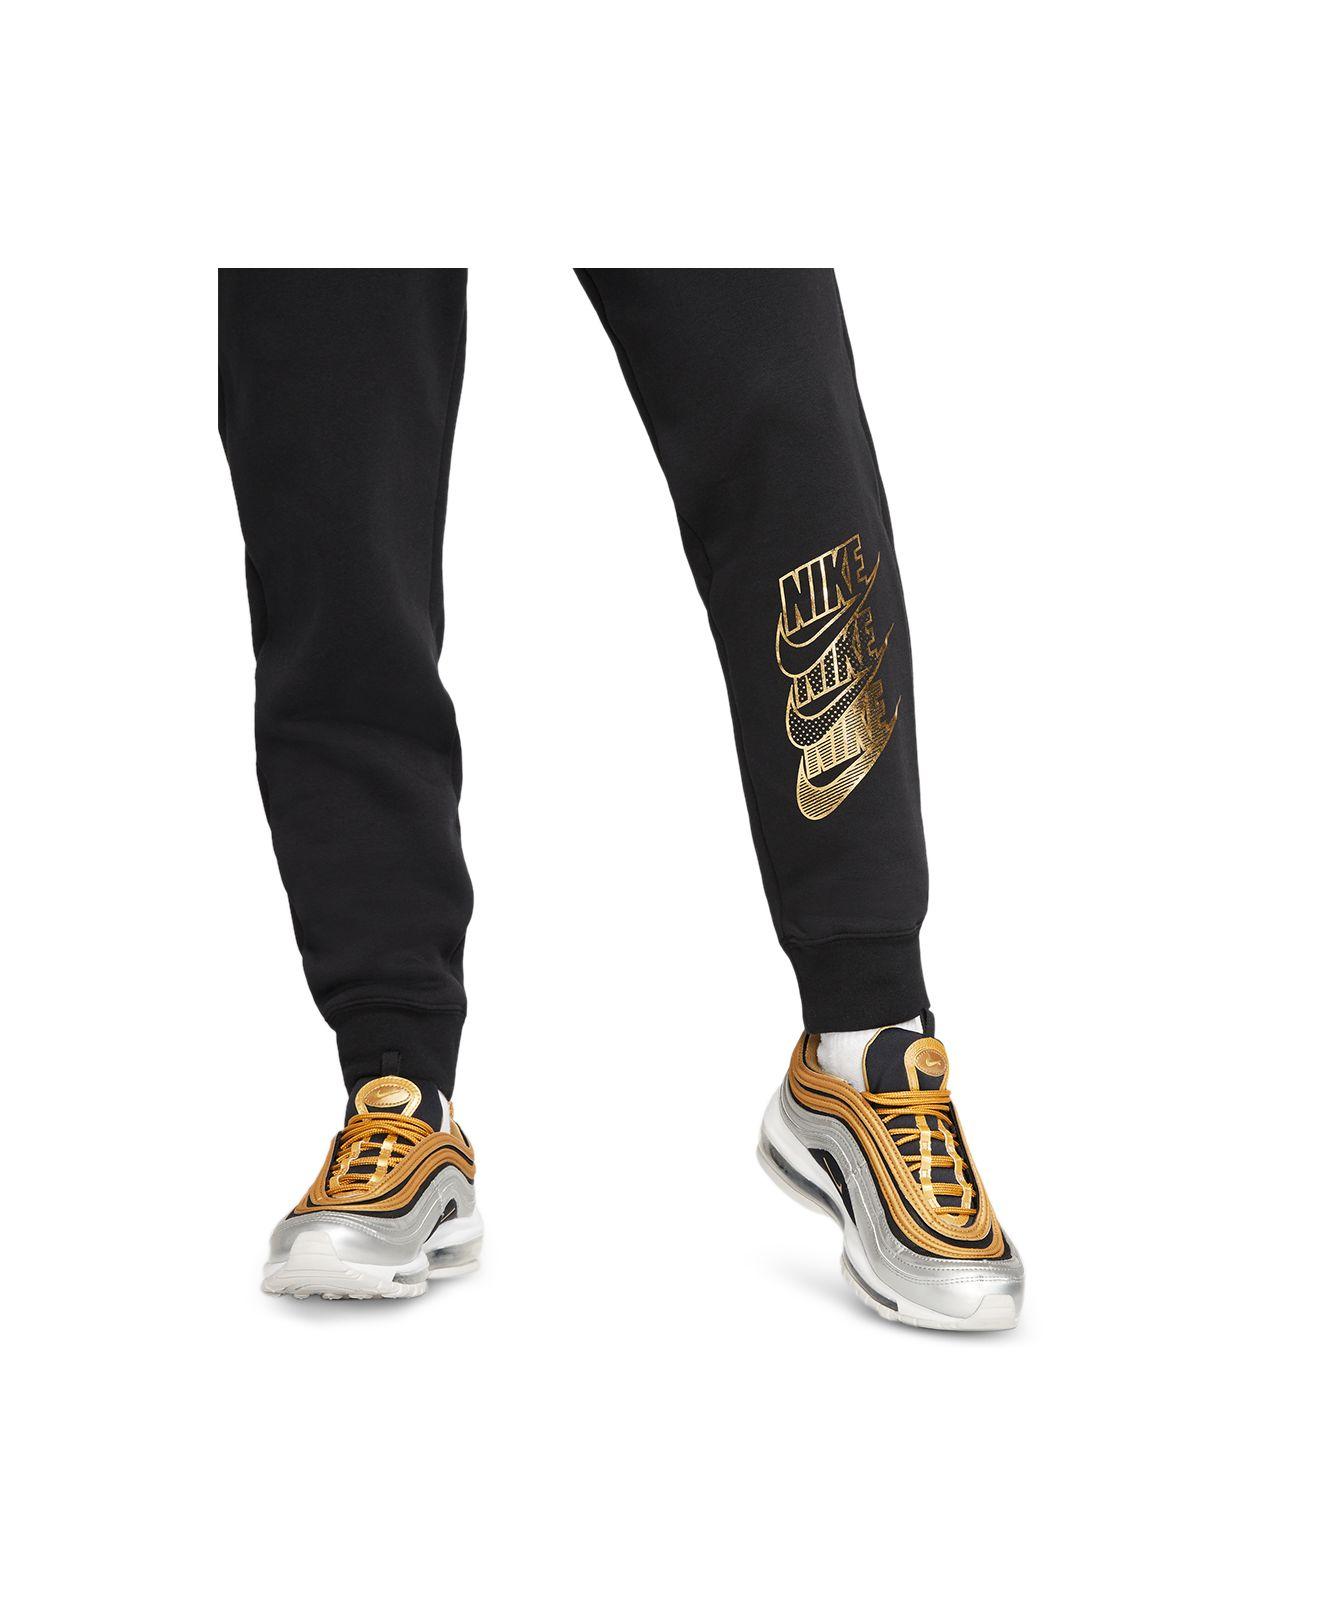 black and gold nike sweatsuit